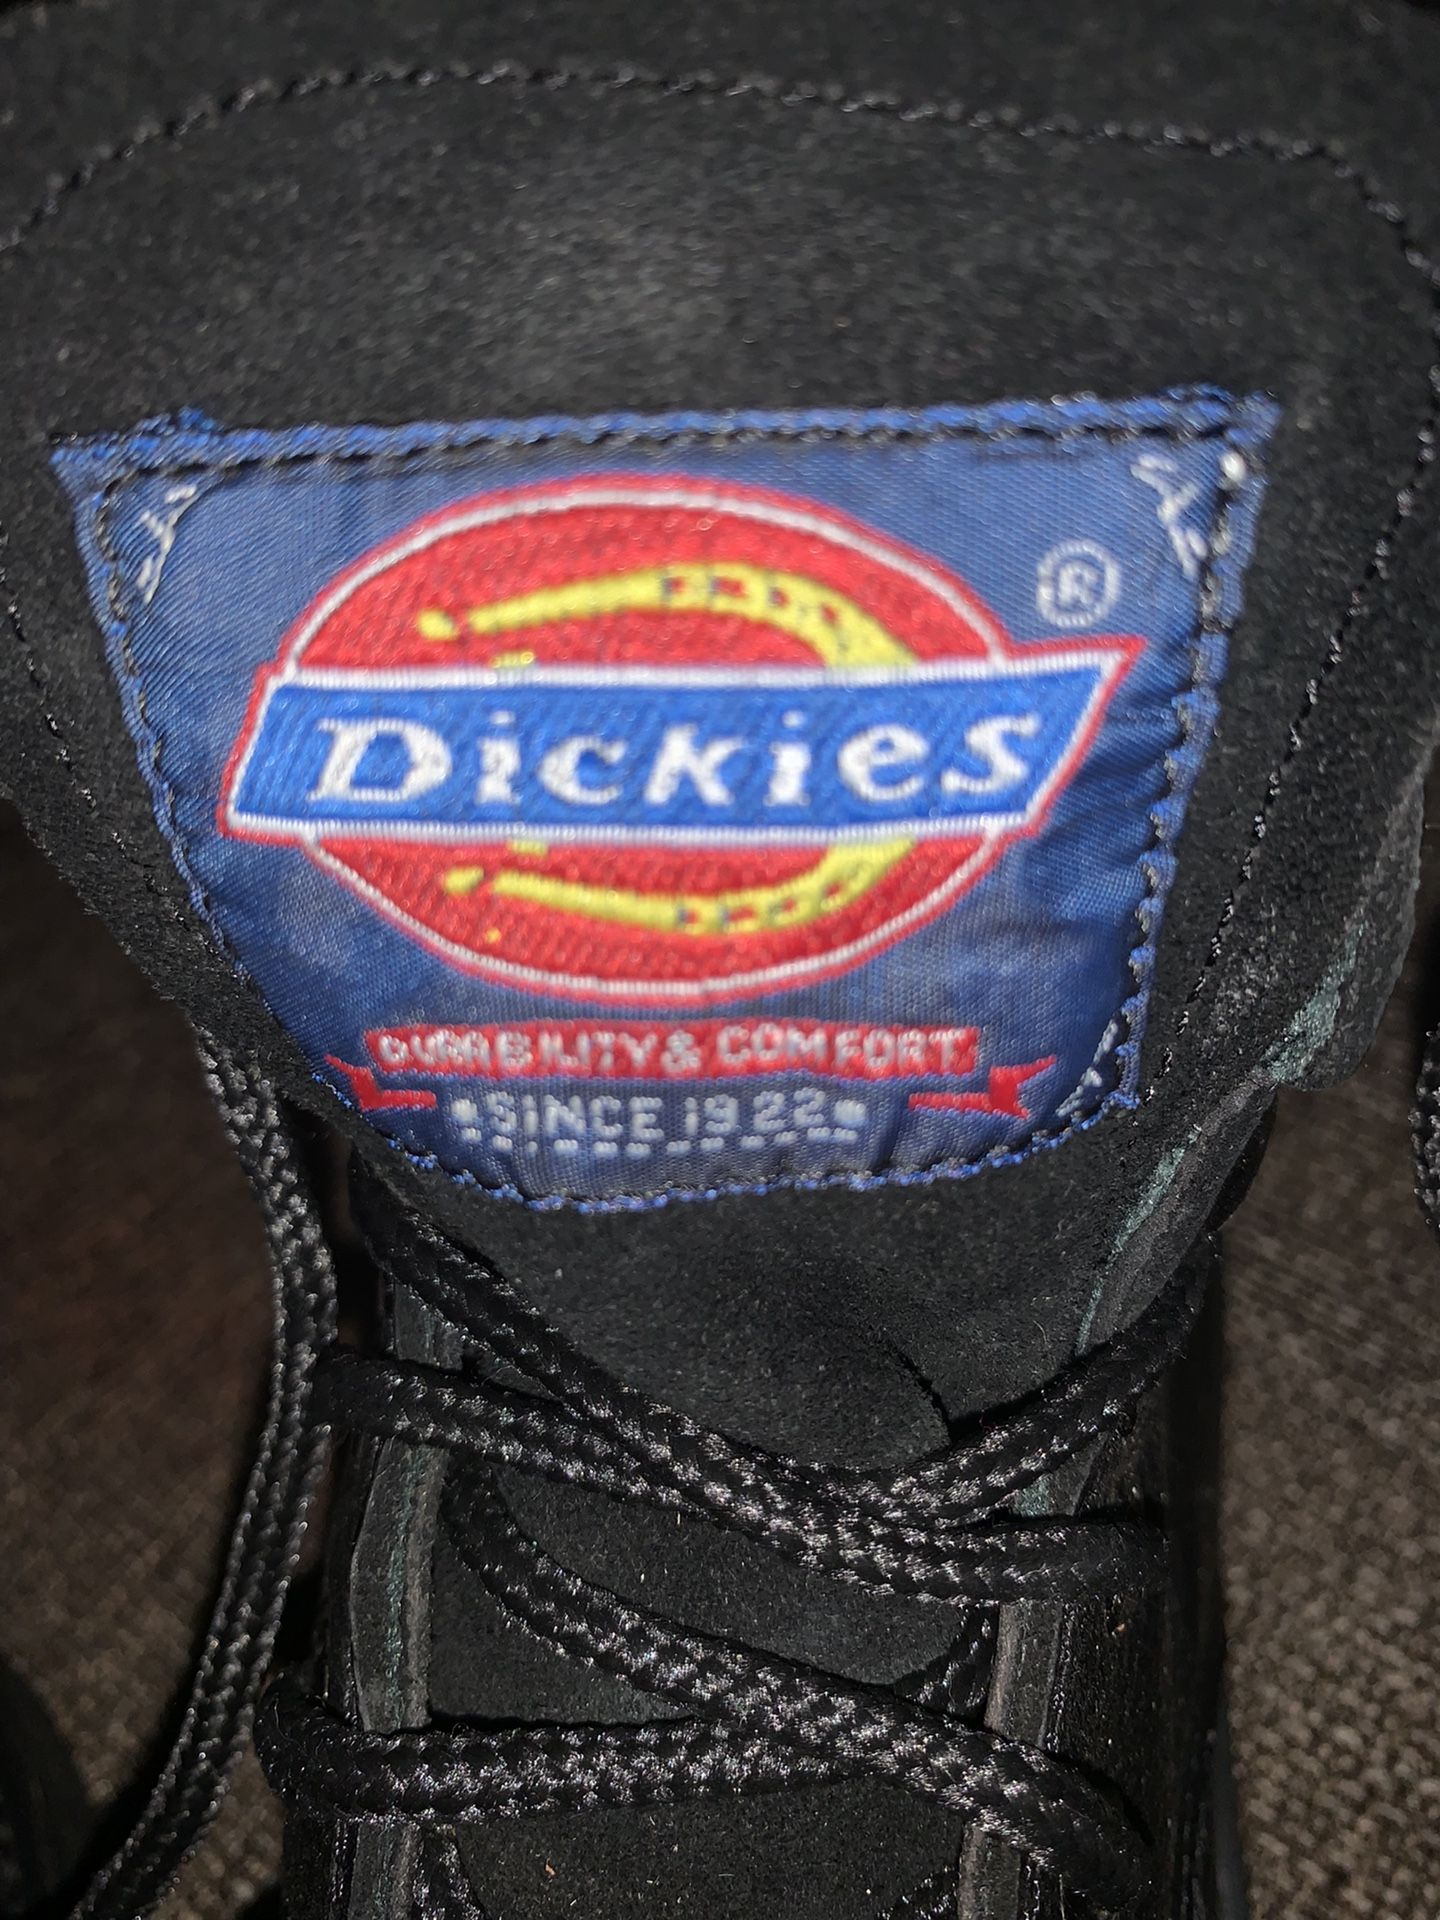 Woman’s Work Boots (Dickies)